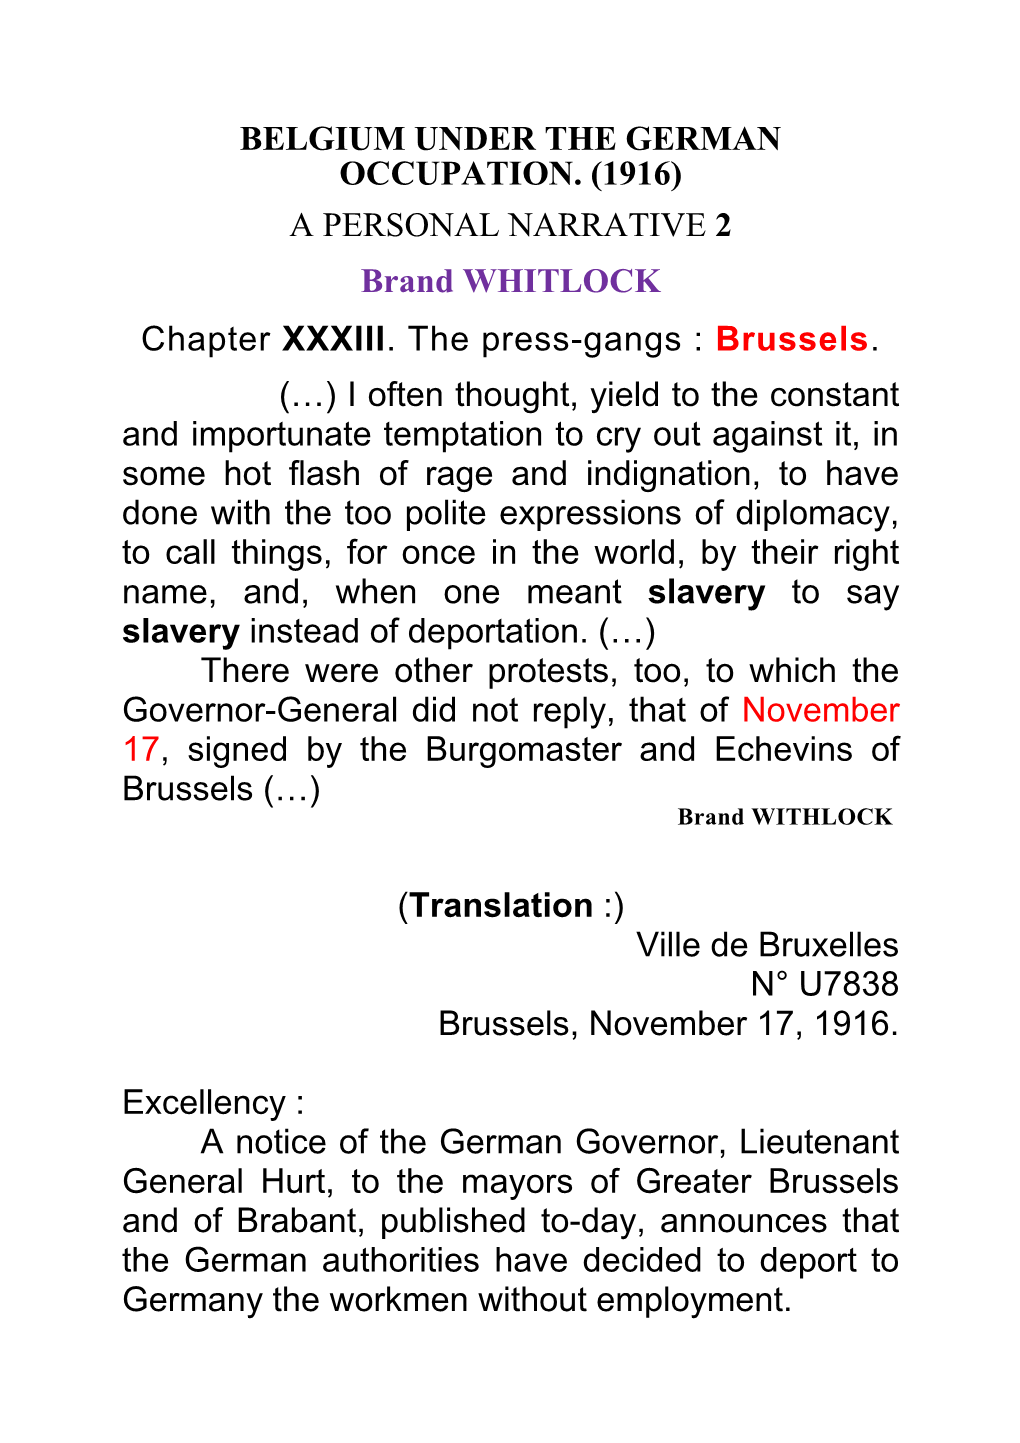 BELGIUM UNDER the GERMAN OCCUPATION. (1916) a PERSONAL NARRATIVE 2 Brand WHITLOCK Chapter XXXIII